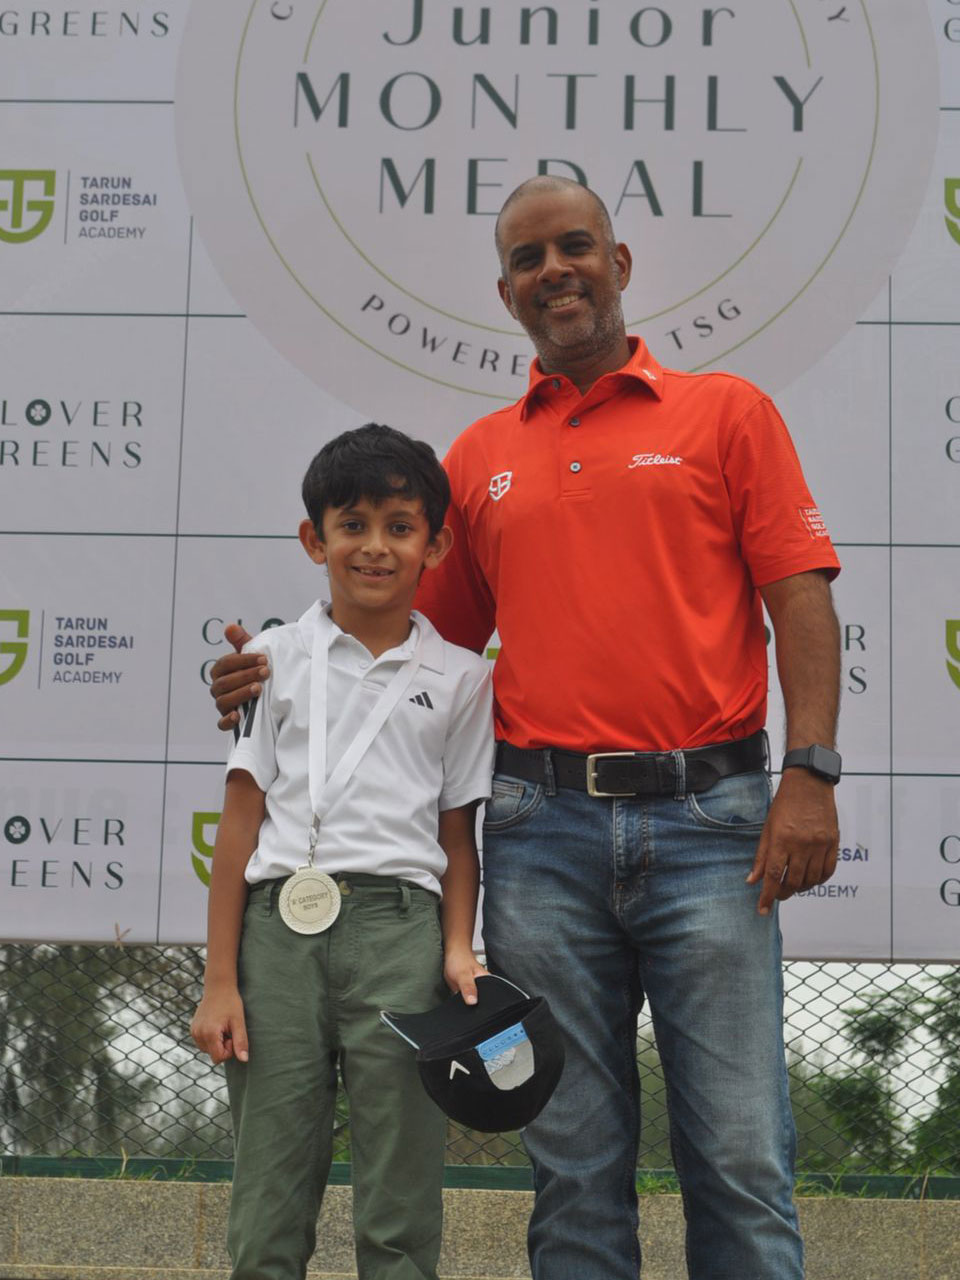 Kabir Singh won the  'E' Boys category at the Clover Greens Junior Monthly Medal powered by TSG, held at Clover Greens Golf Course in Bangalore